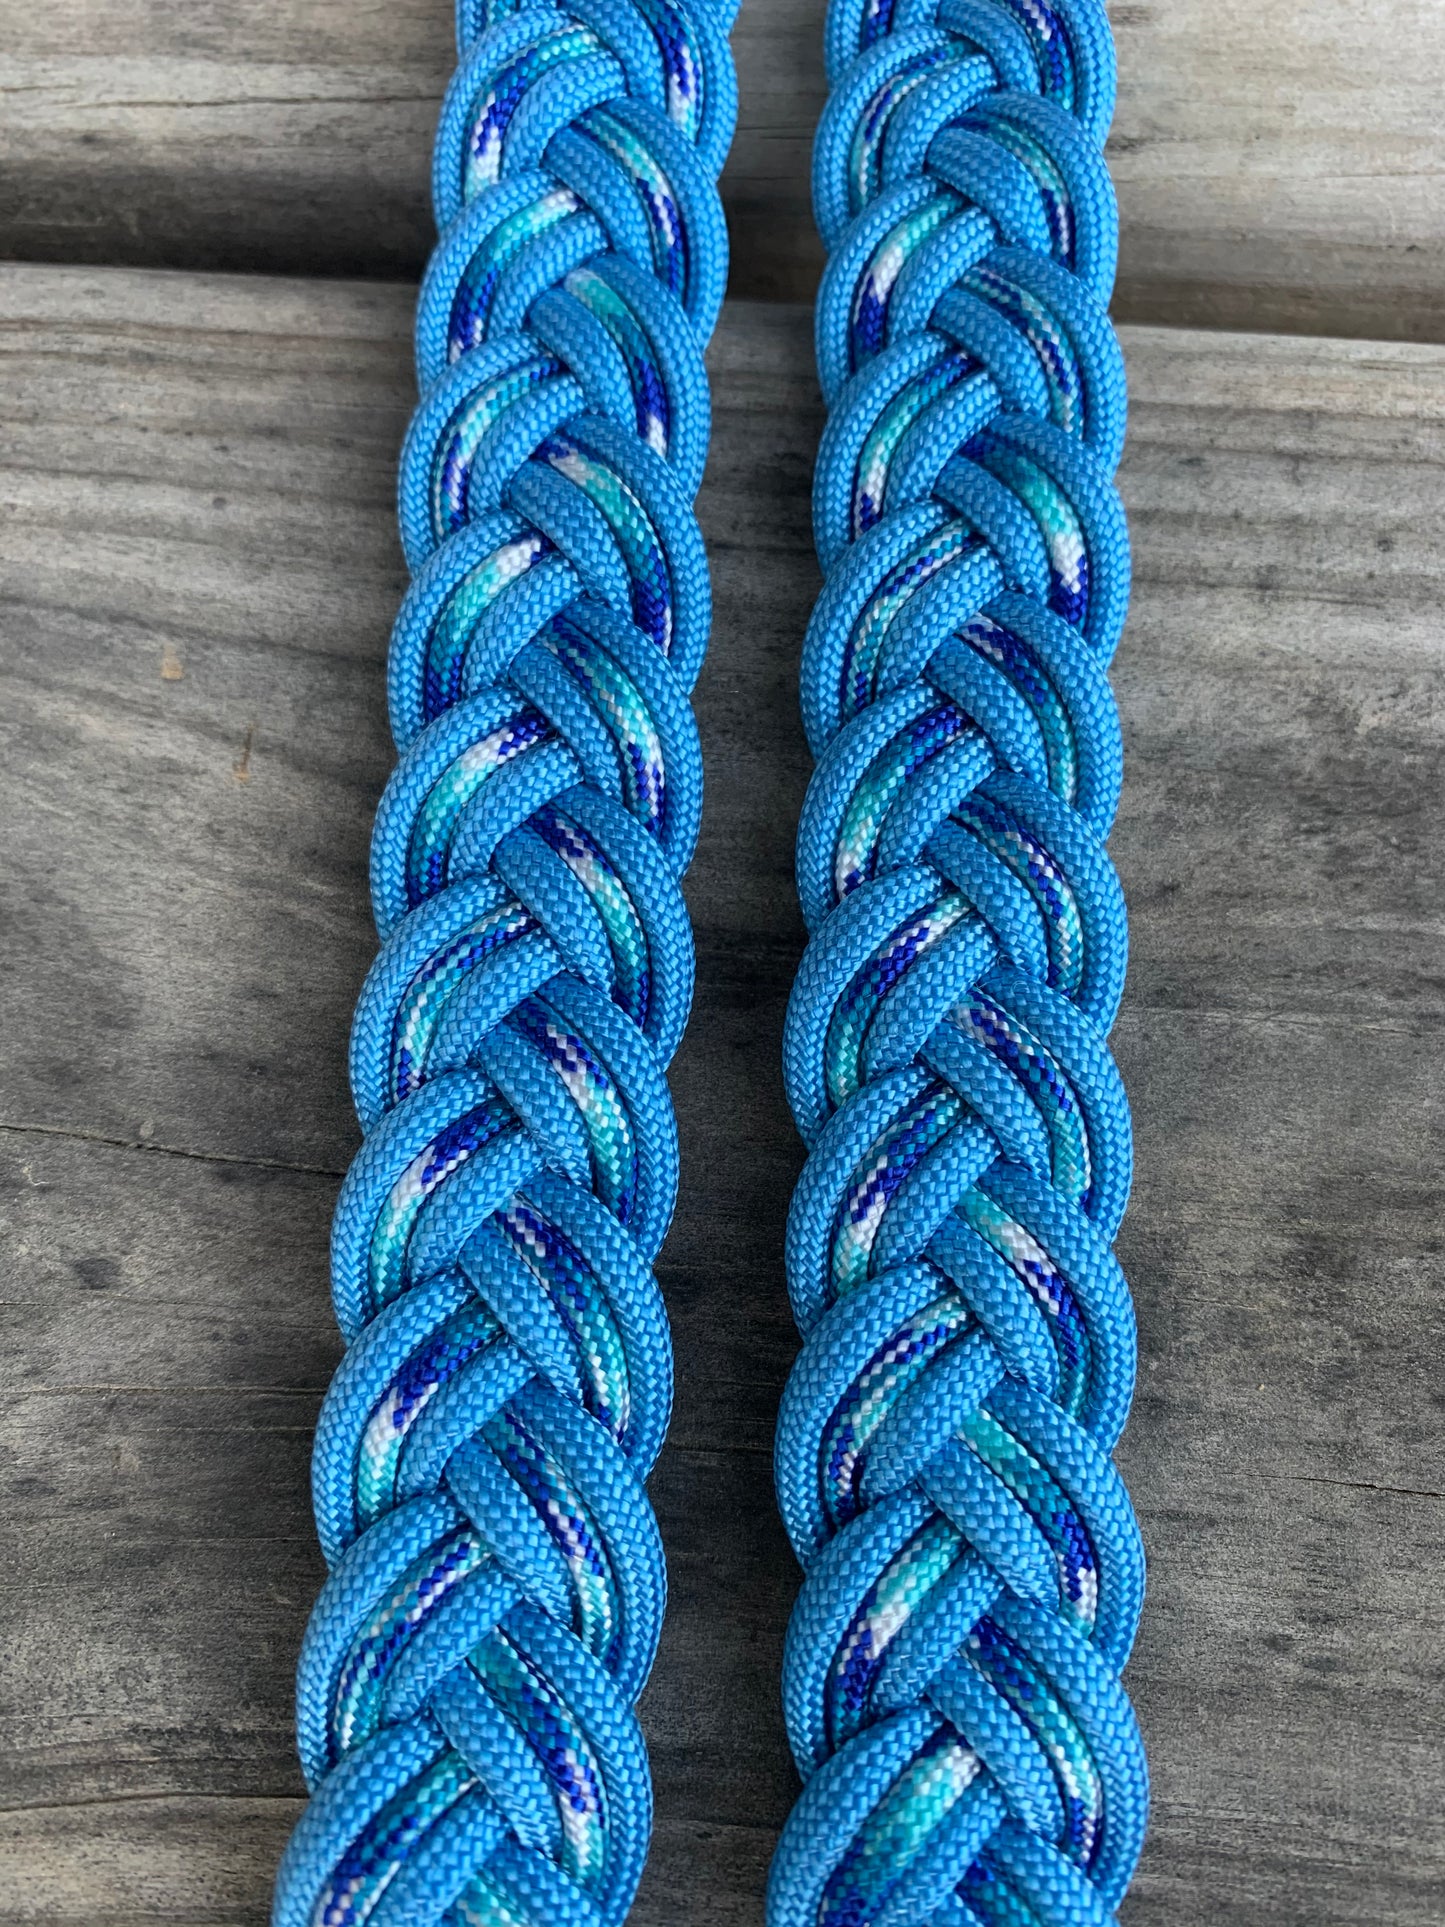 Blue and icy blue reins